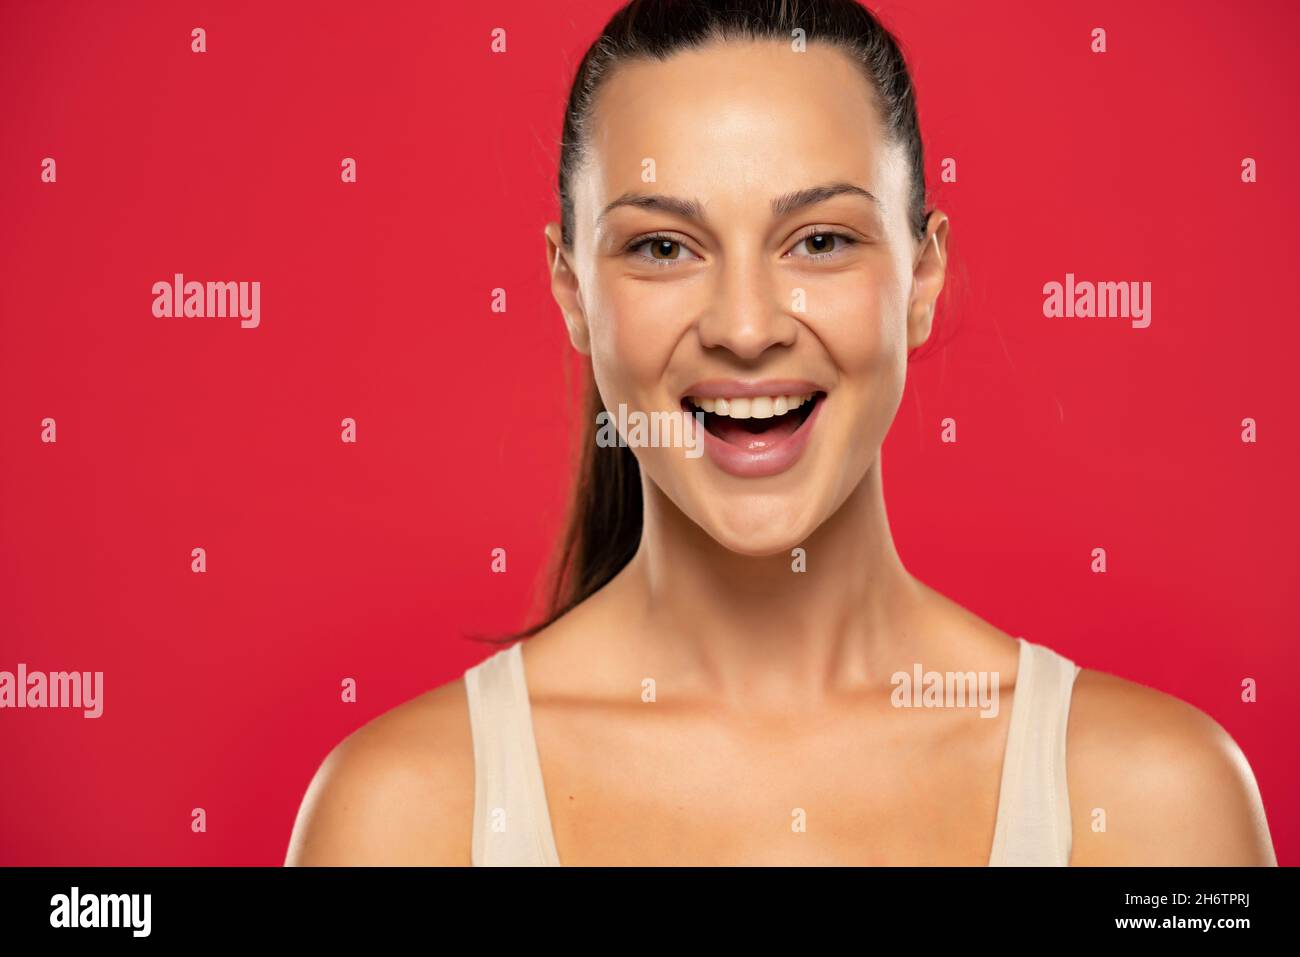 Portrait of beautiful smiling woman with tied hair on a red background Stock Photo